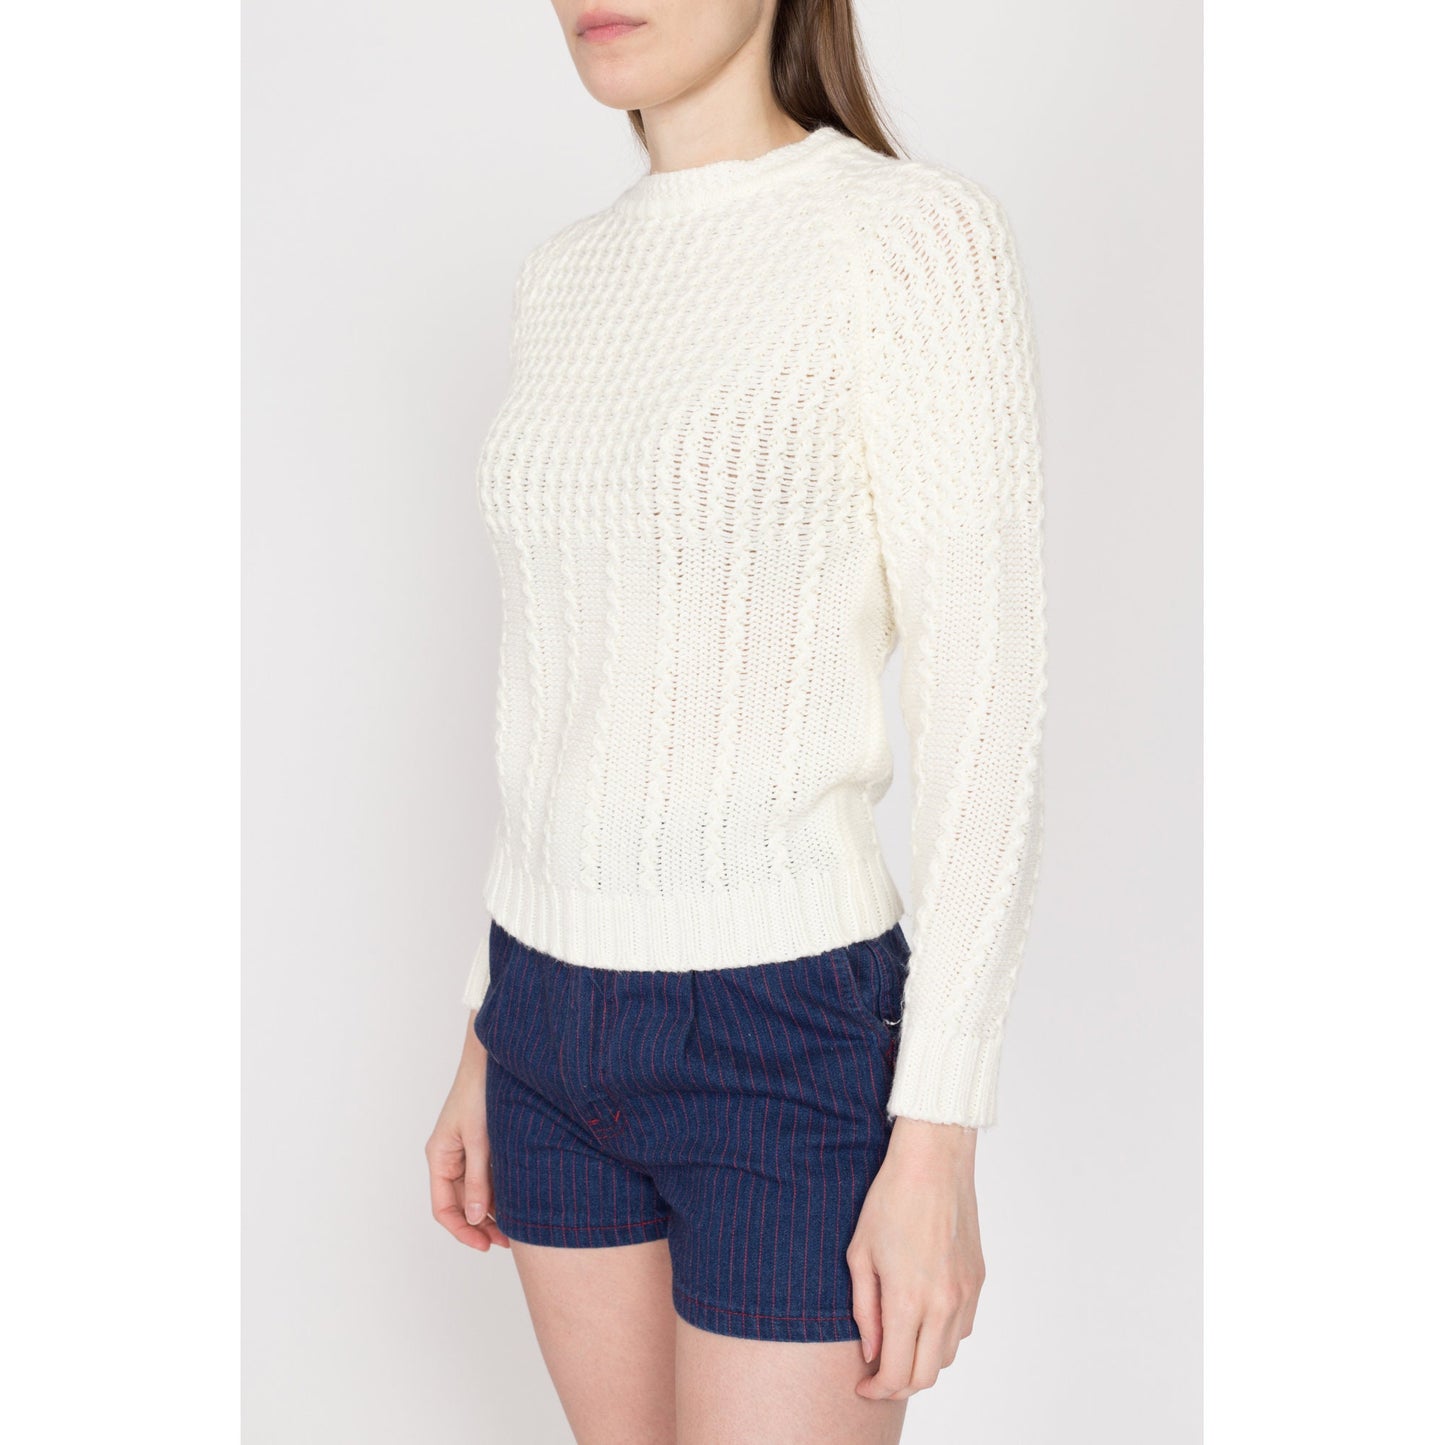 Small 80s White Cable Knit Sweater | Vintage Plain Pullover Jumper